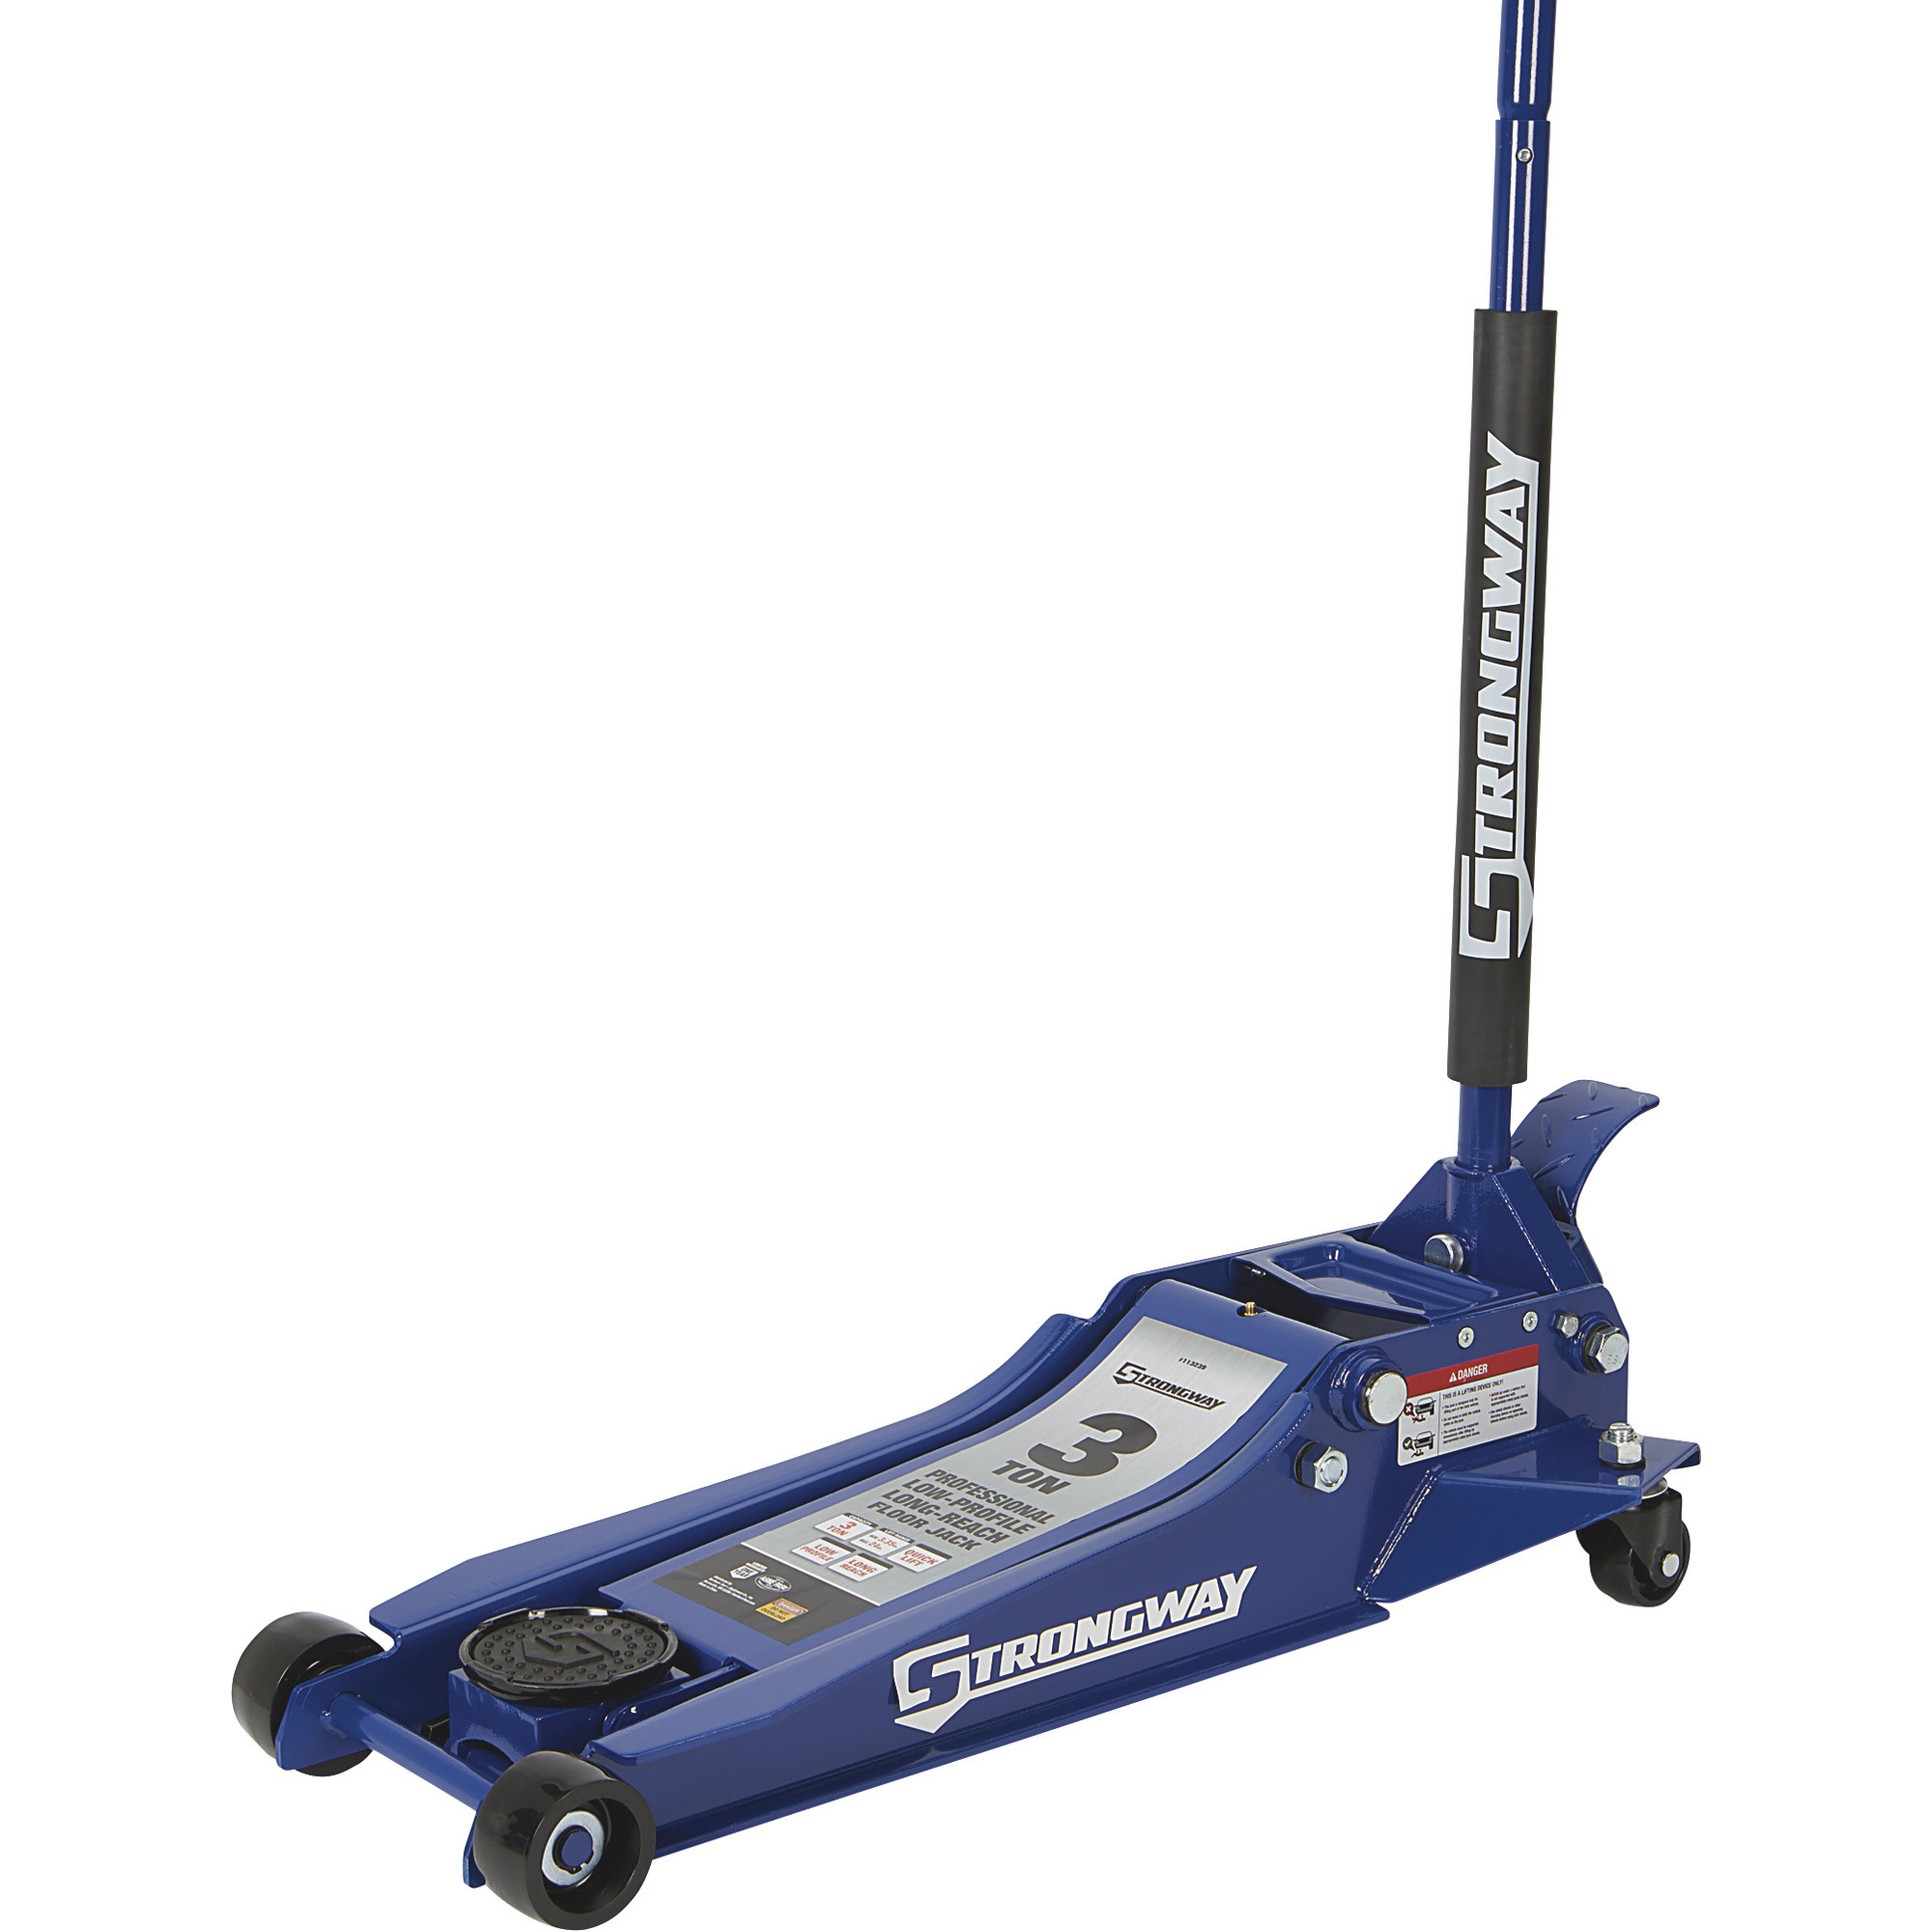 Strongway Long-Reach, Low-Profile Professional Service Floor Jack â 3-Ton Capacity